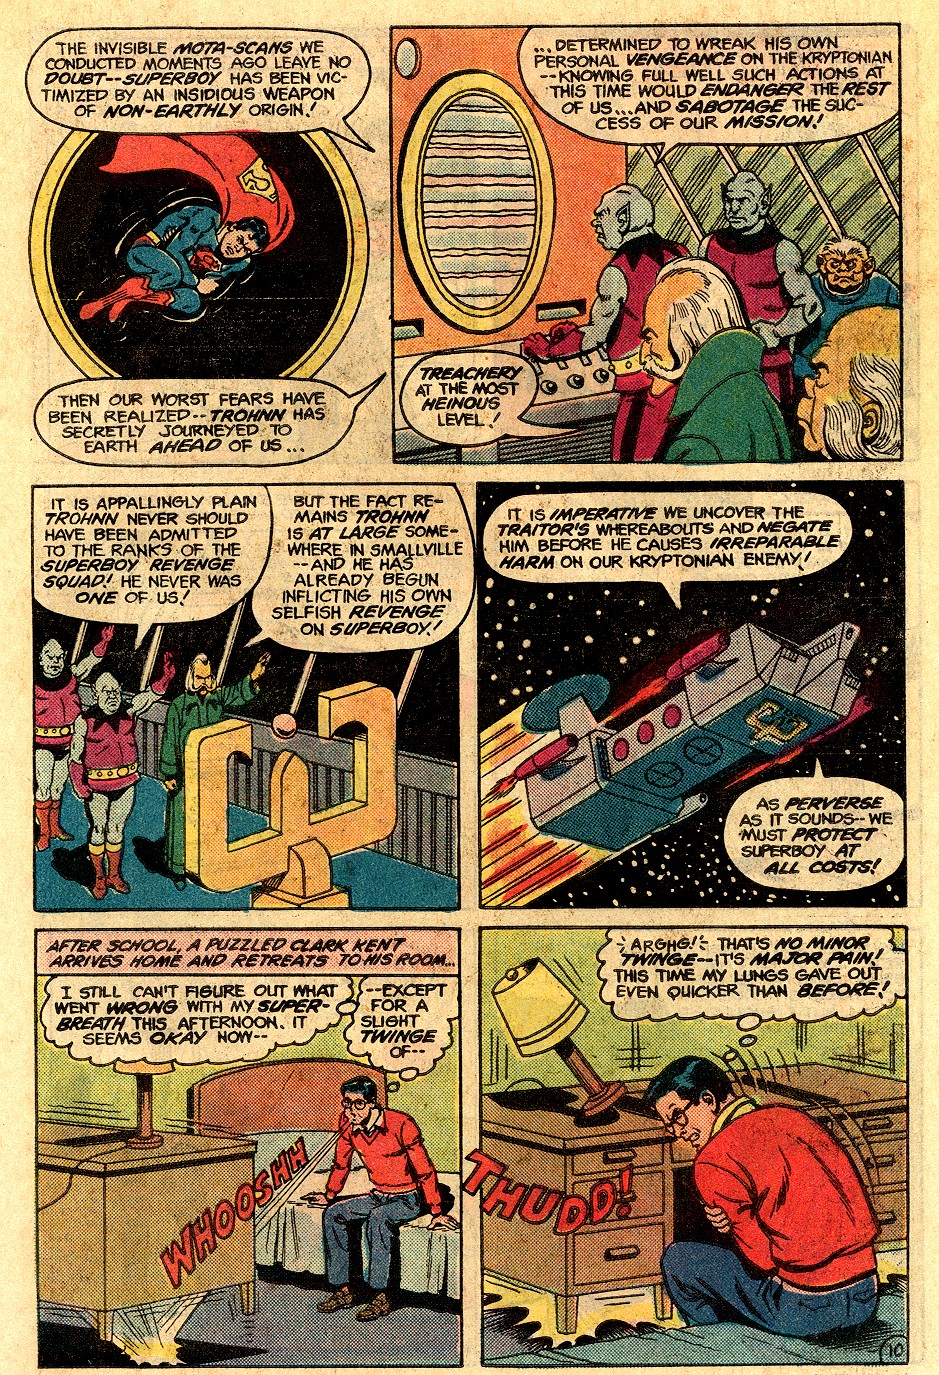 The New Adventures of Superboy 32 Page 14